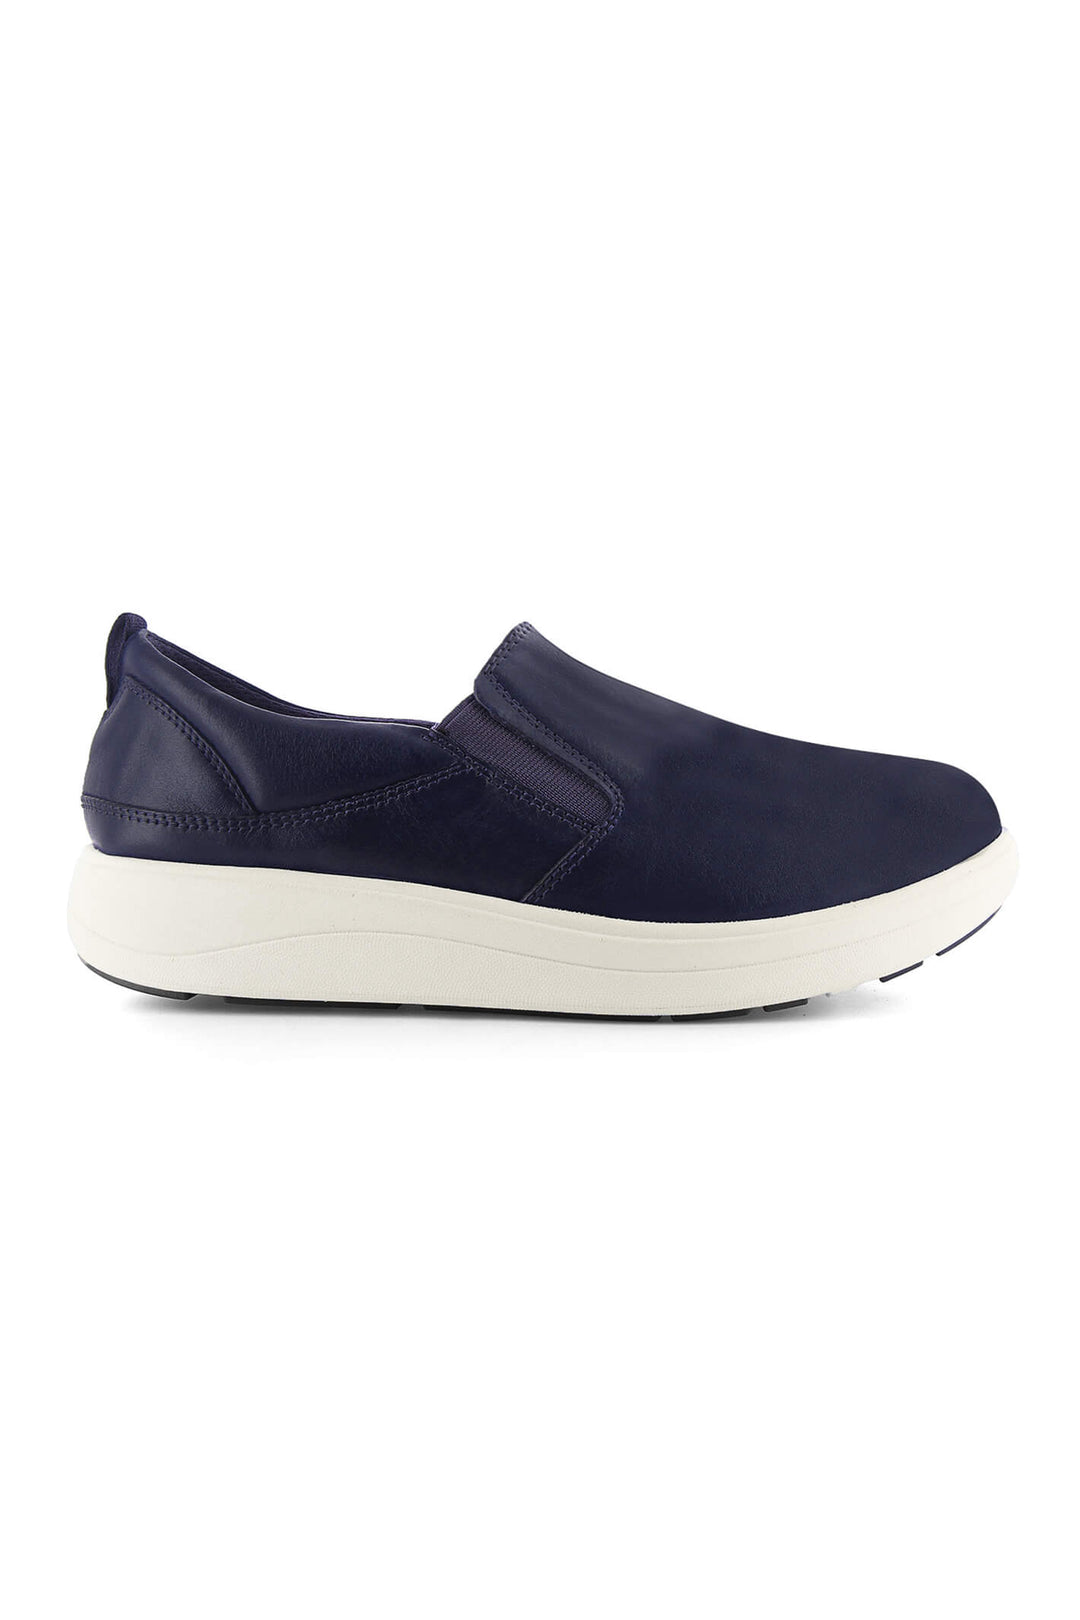 Strive Florida II Navy Leather Trainer - Shirley Allum Boutique